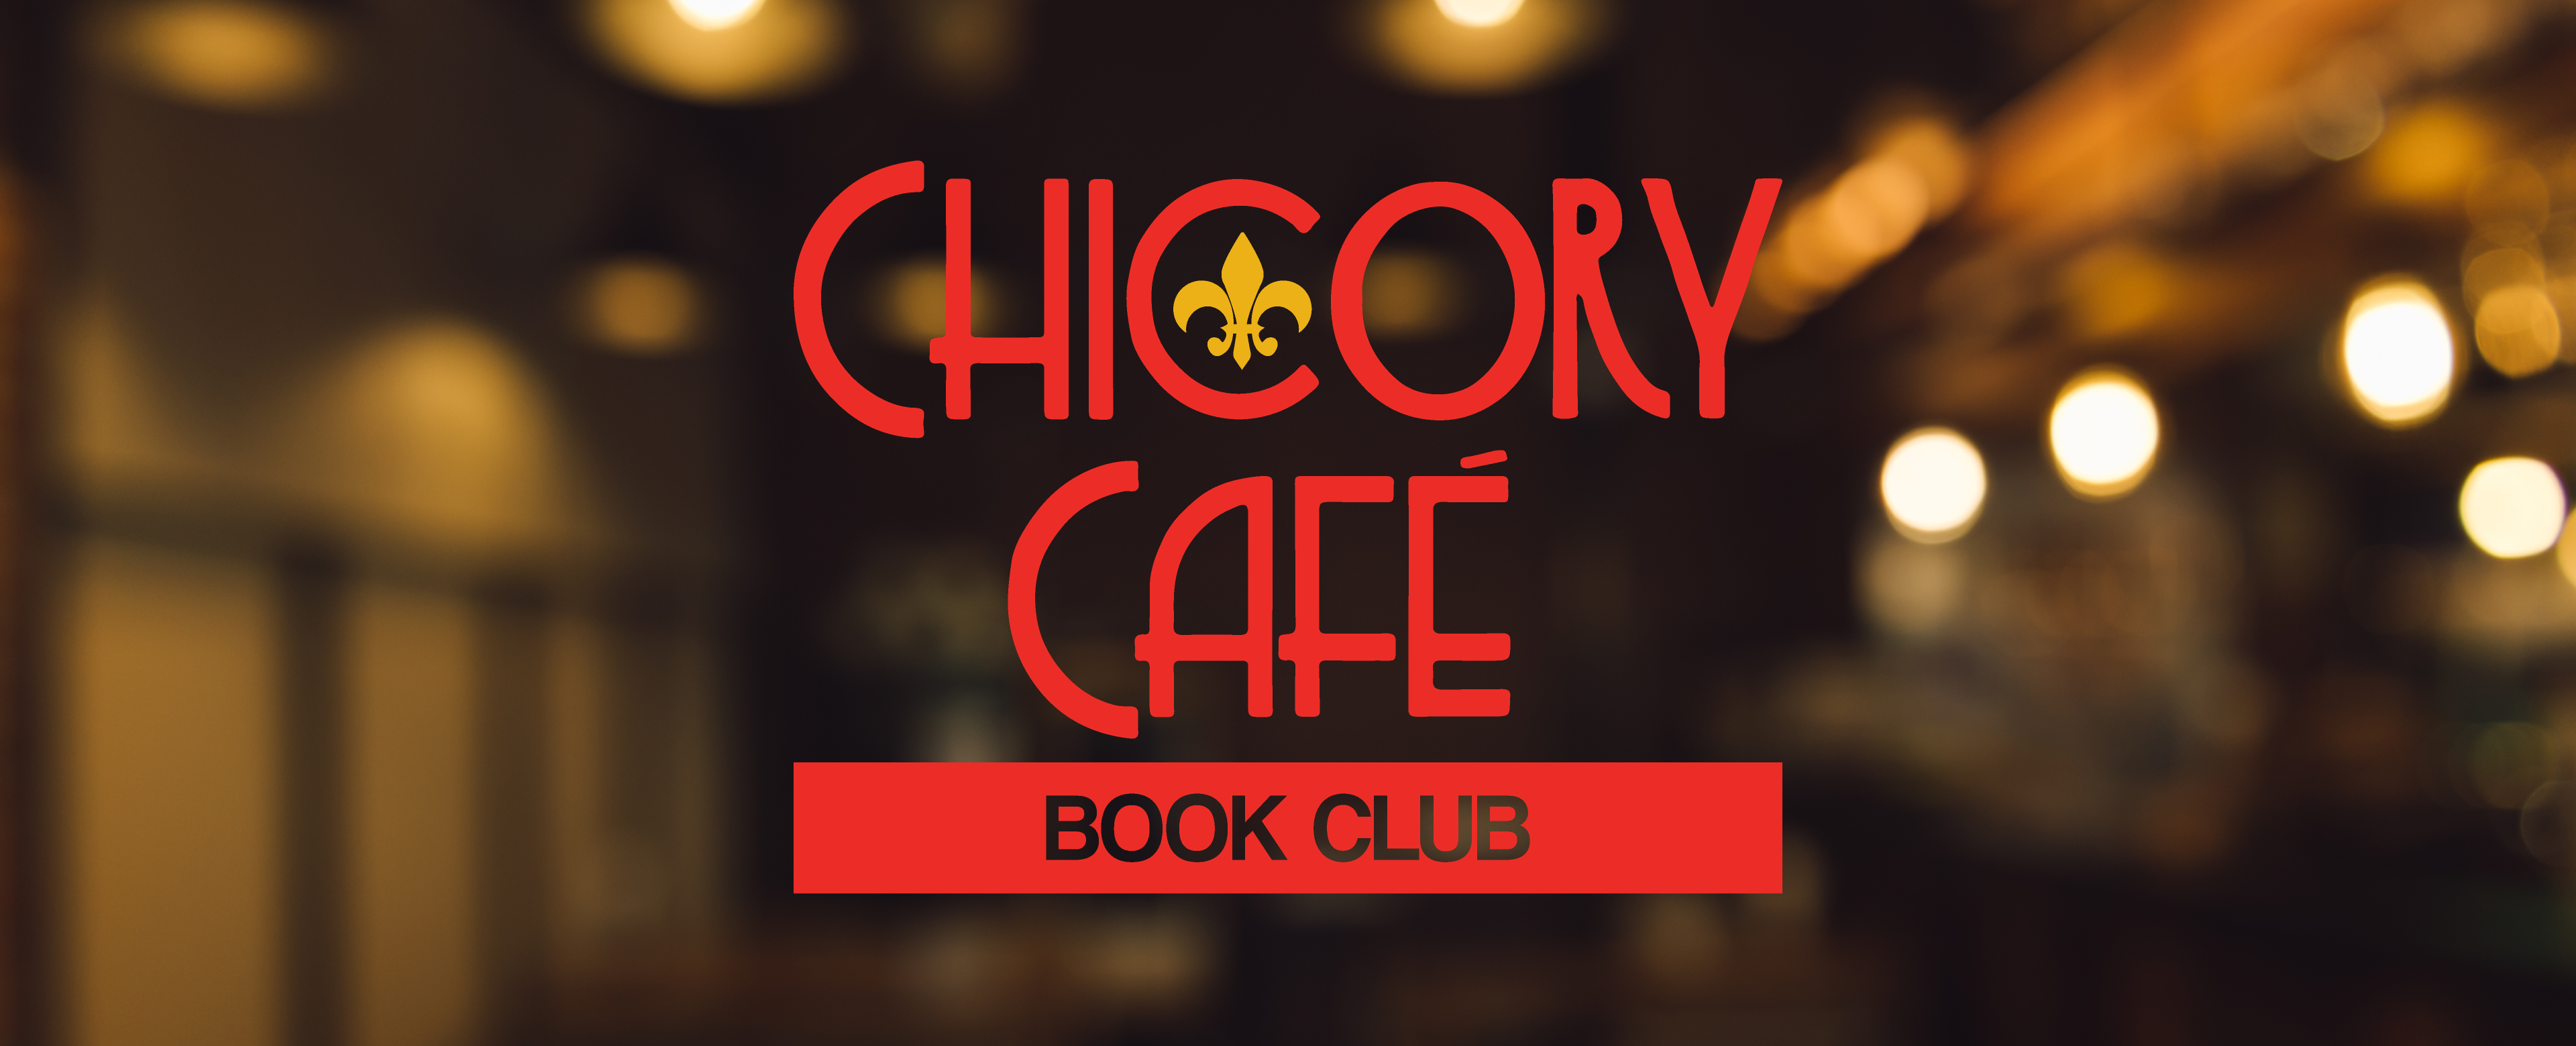 Chicory Cafe Book Club